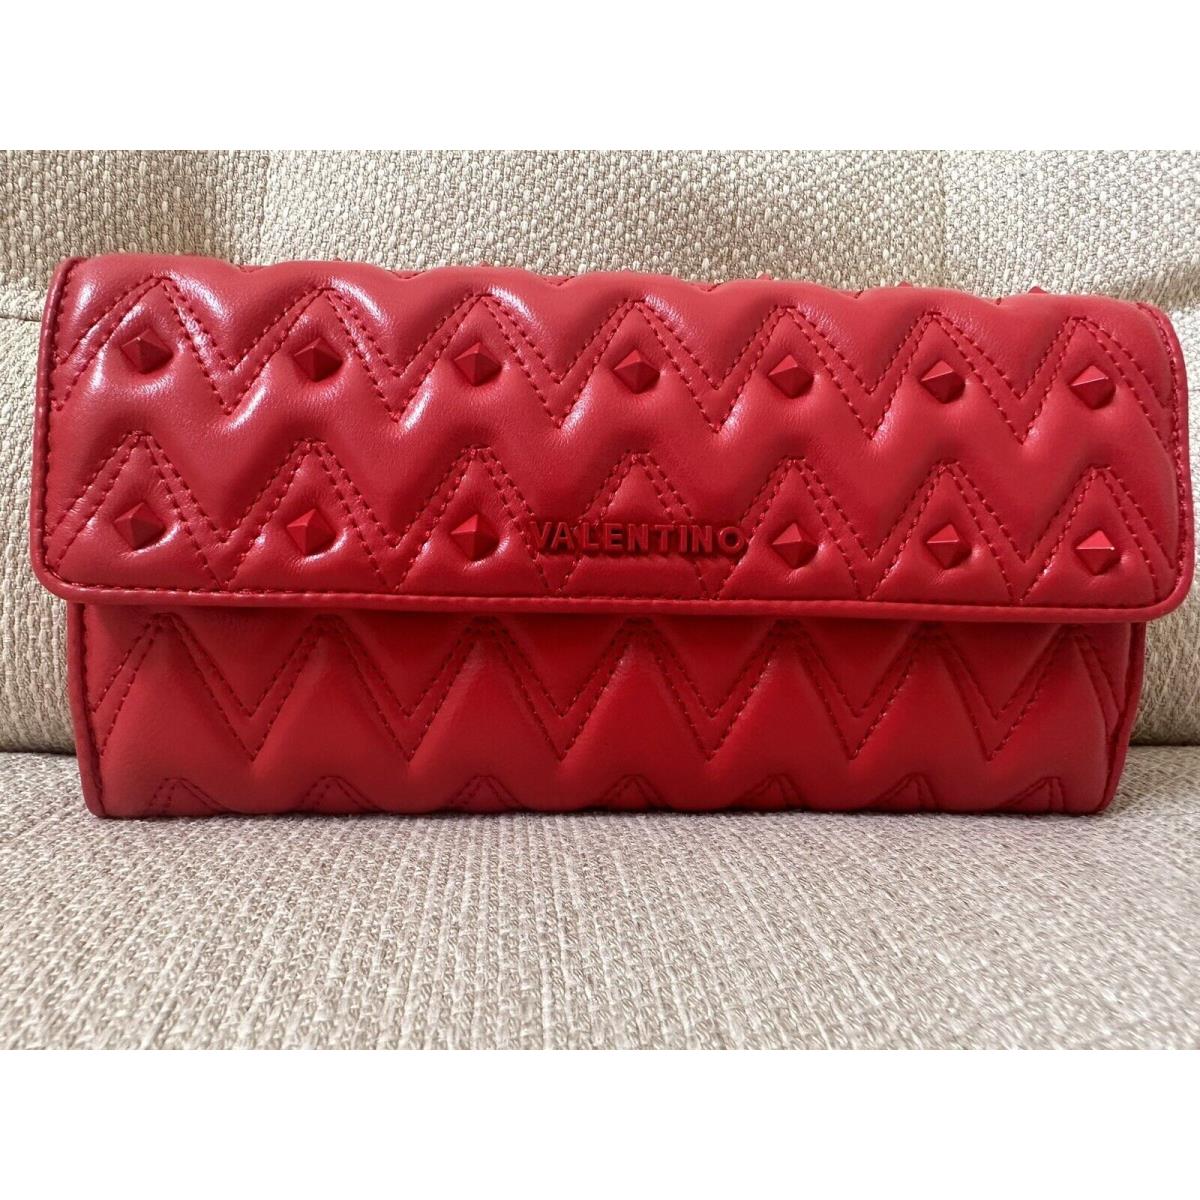 Valentino Julius Studded Flap Chevron Leather Pyramid Red Hot Wallet Purse